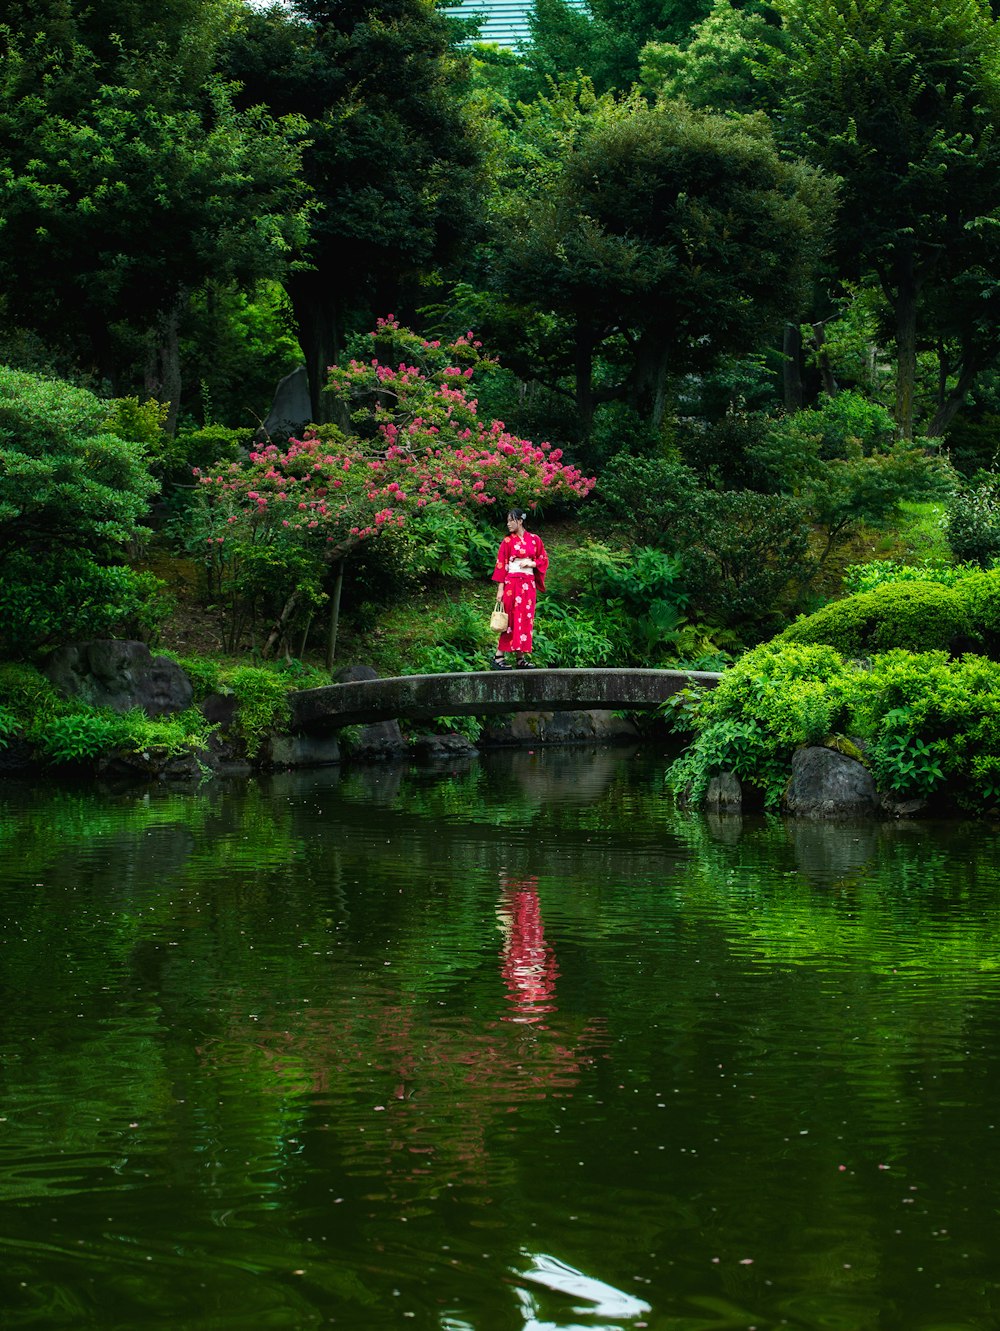 a person standing on a rock in a pond with trees and plants